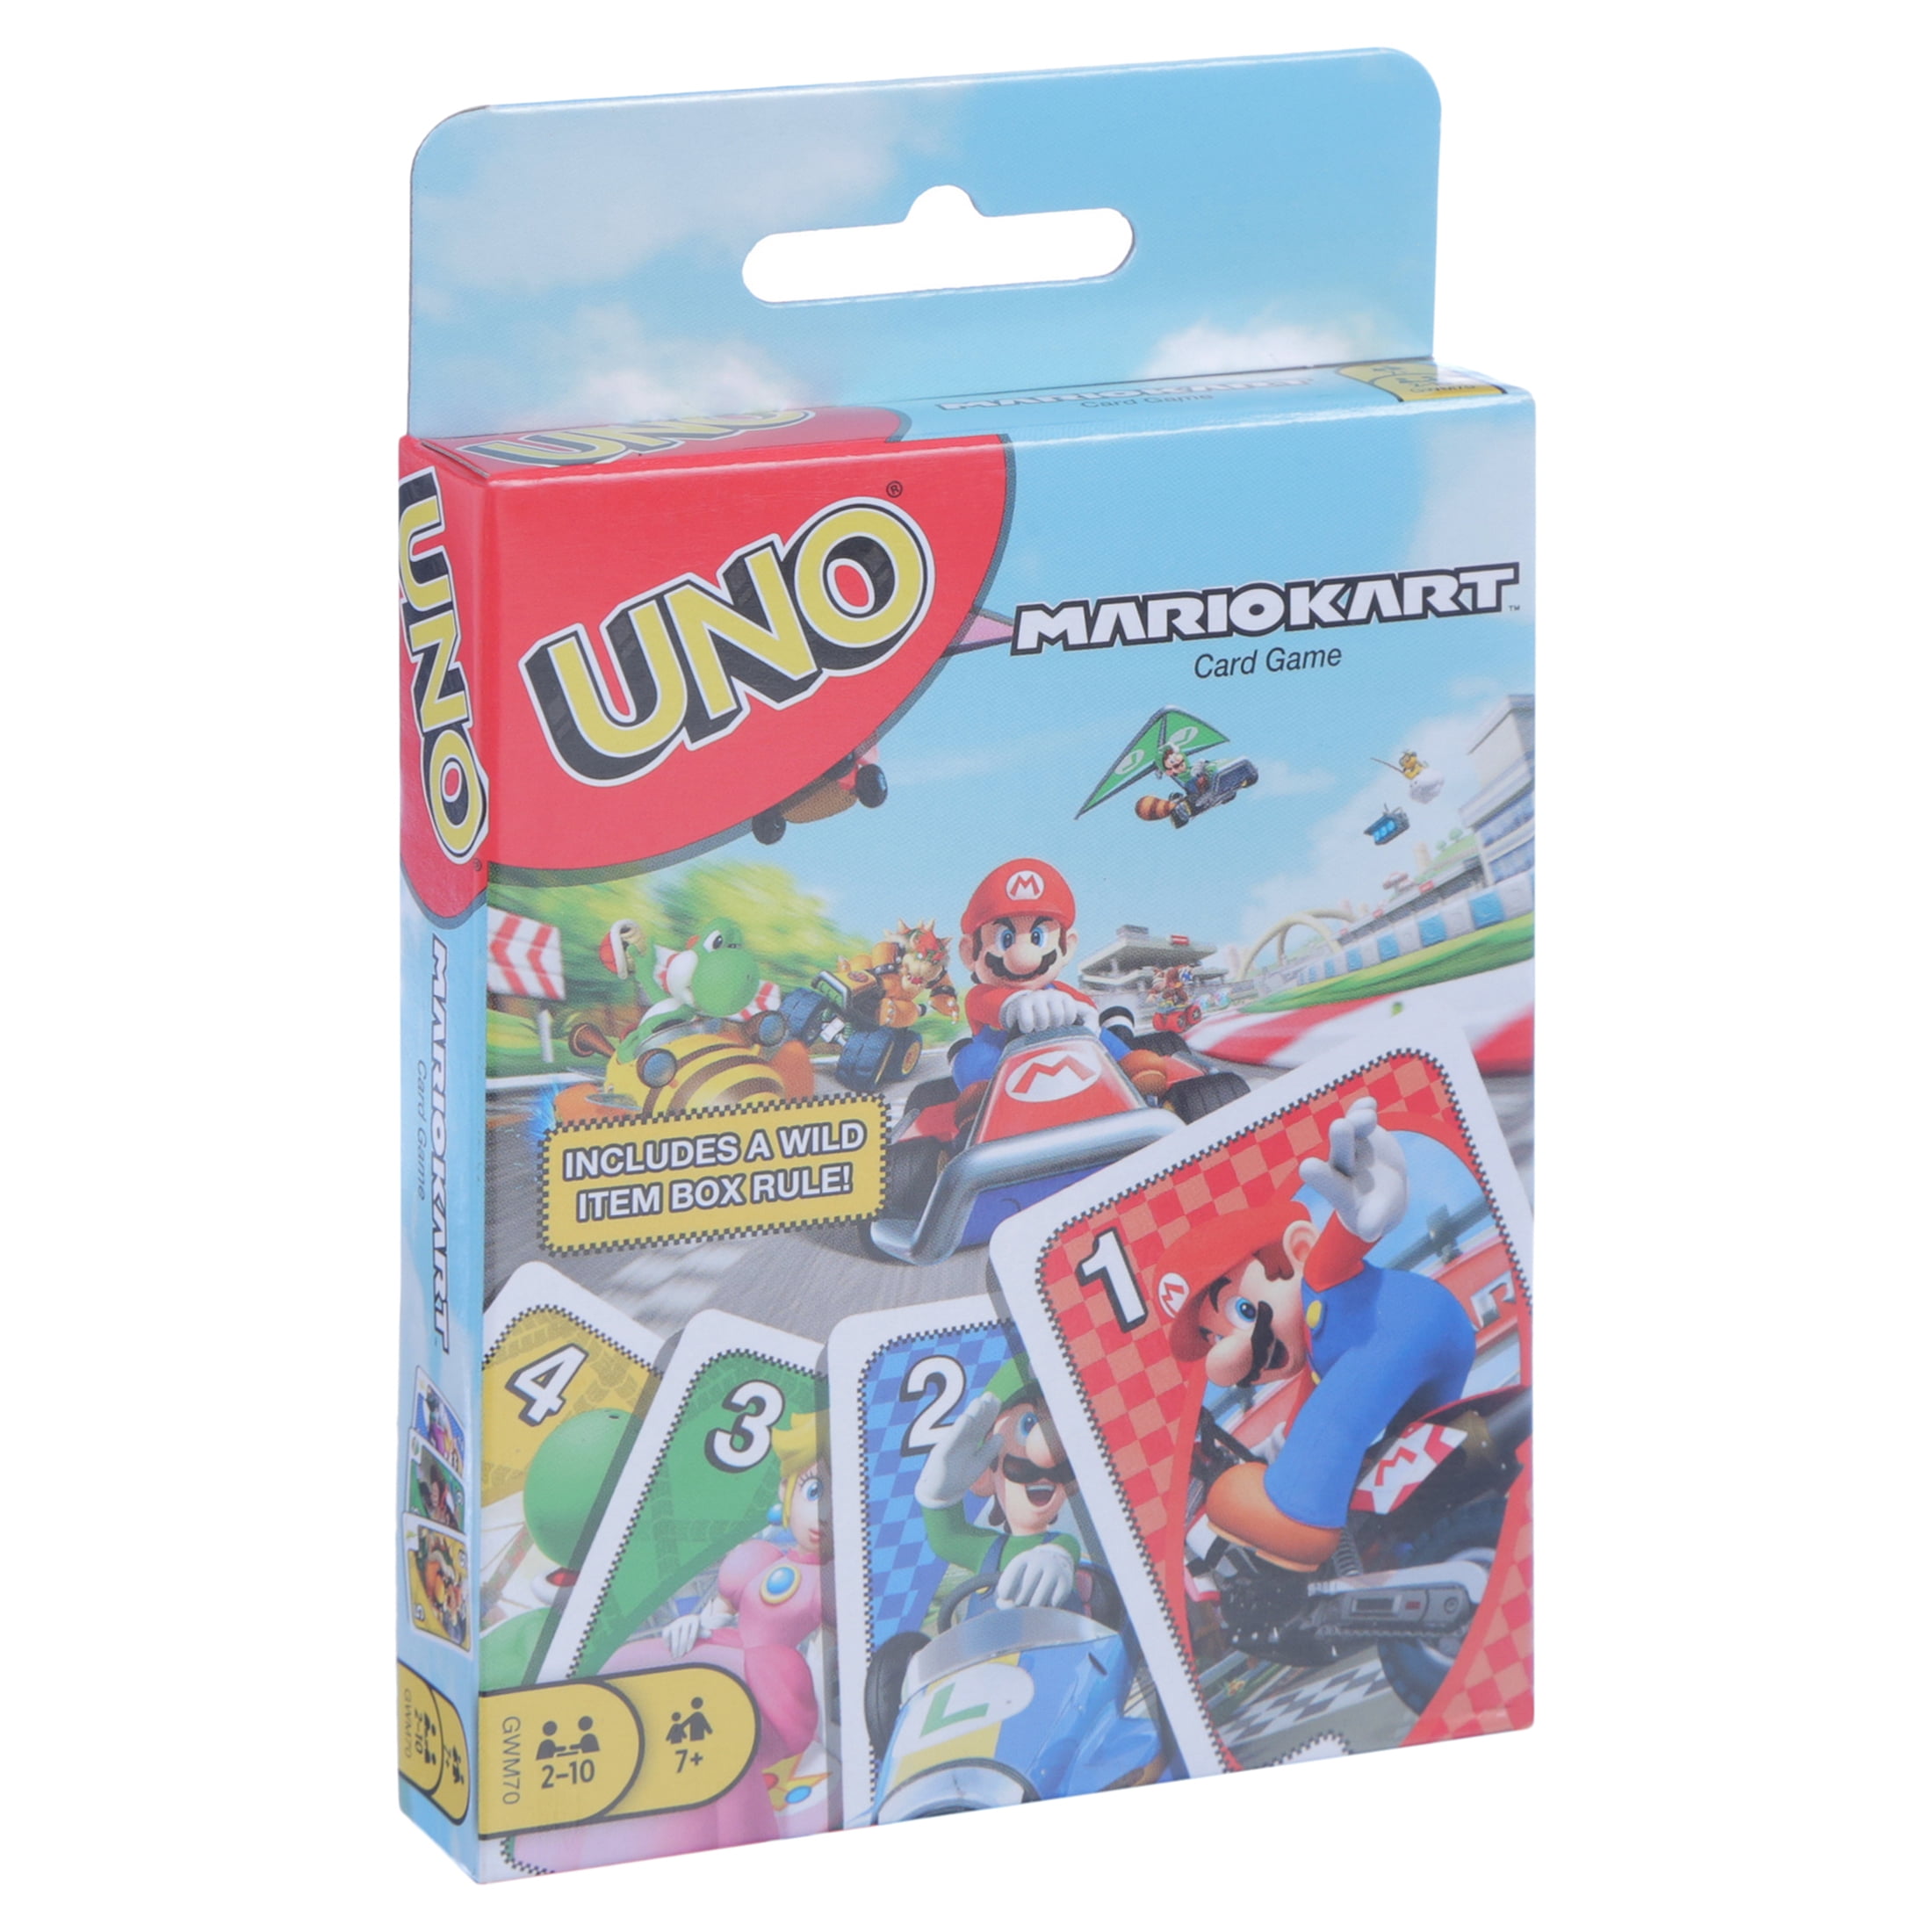 Mattel Games UNO Mario Kart Card Game with 112 Cards & Instructions for... 